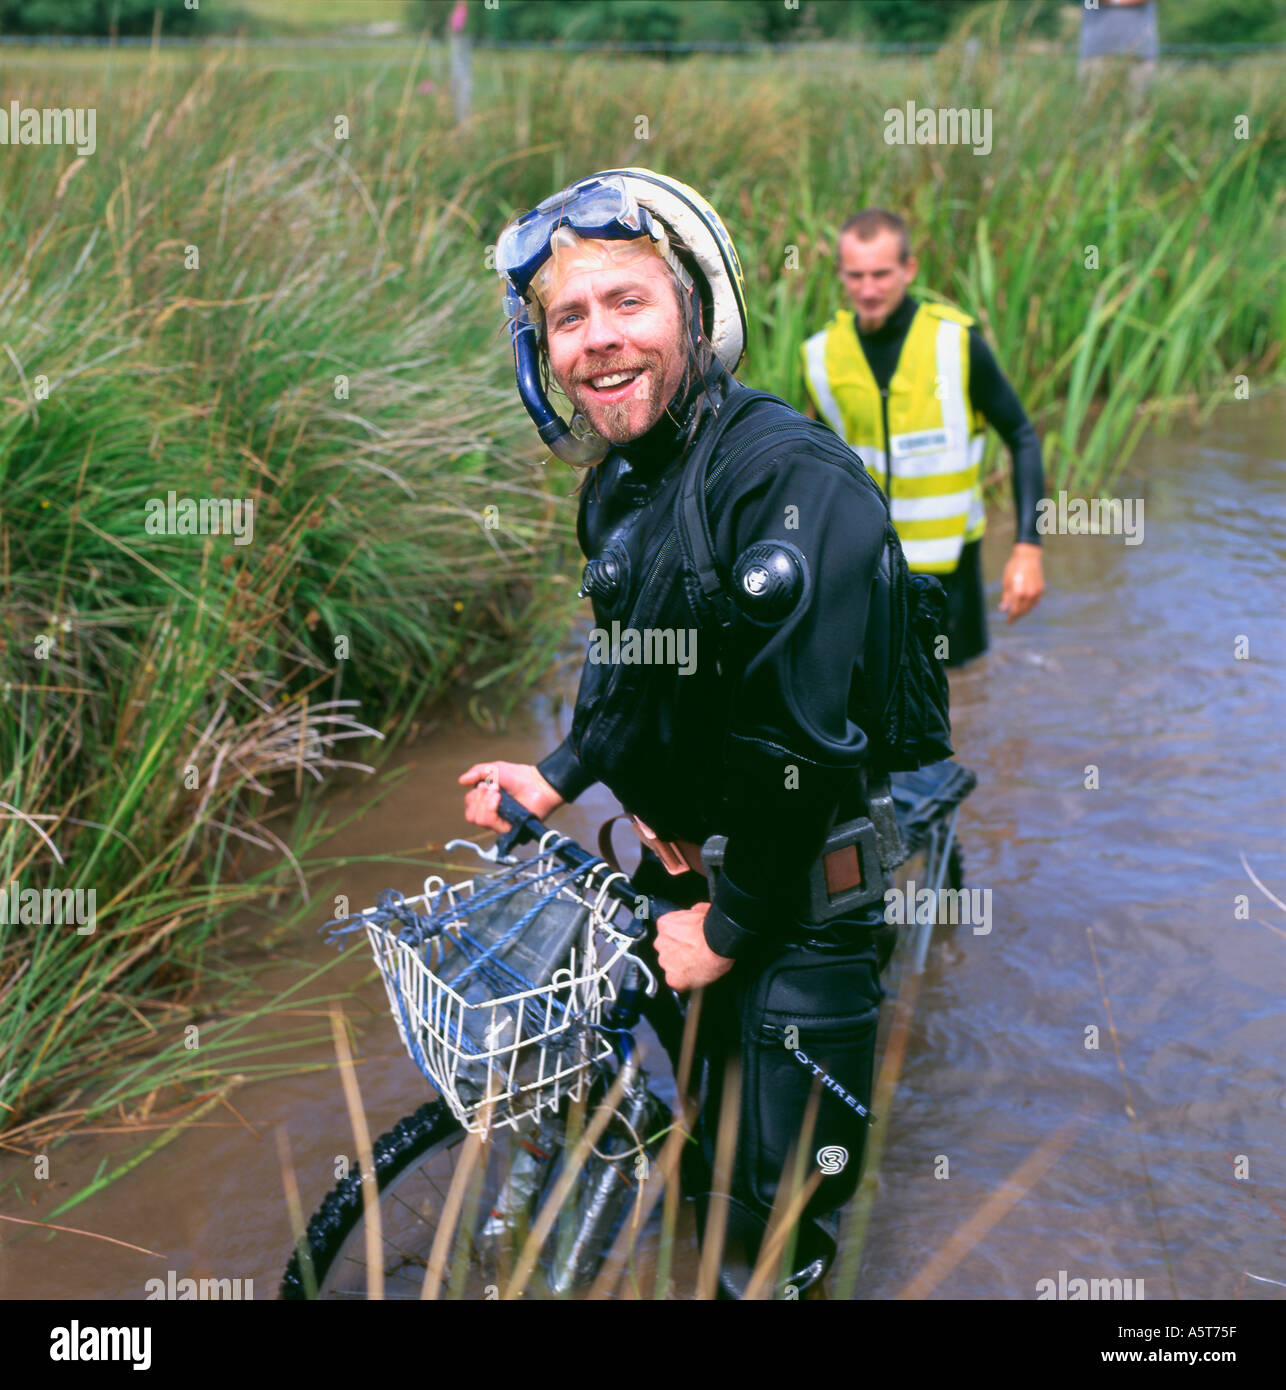 Man coming out of bog at the bog snorkelling mountain bike competititon Llanwrtyd Wells Powys Wales UK Stock Photo